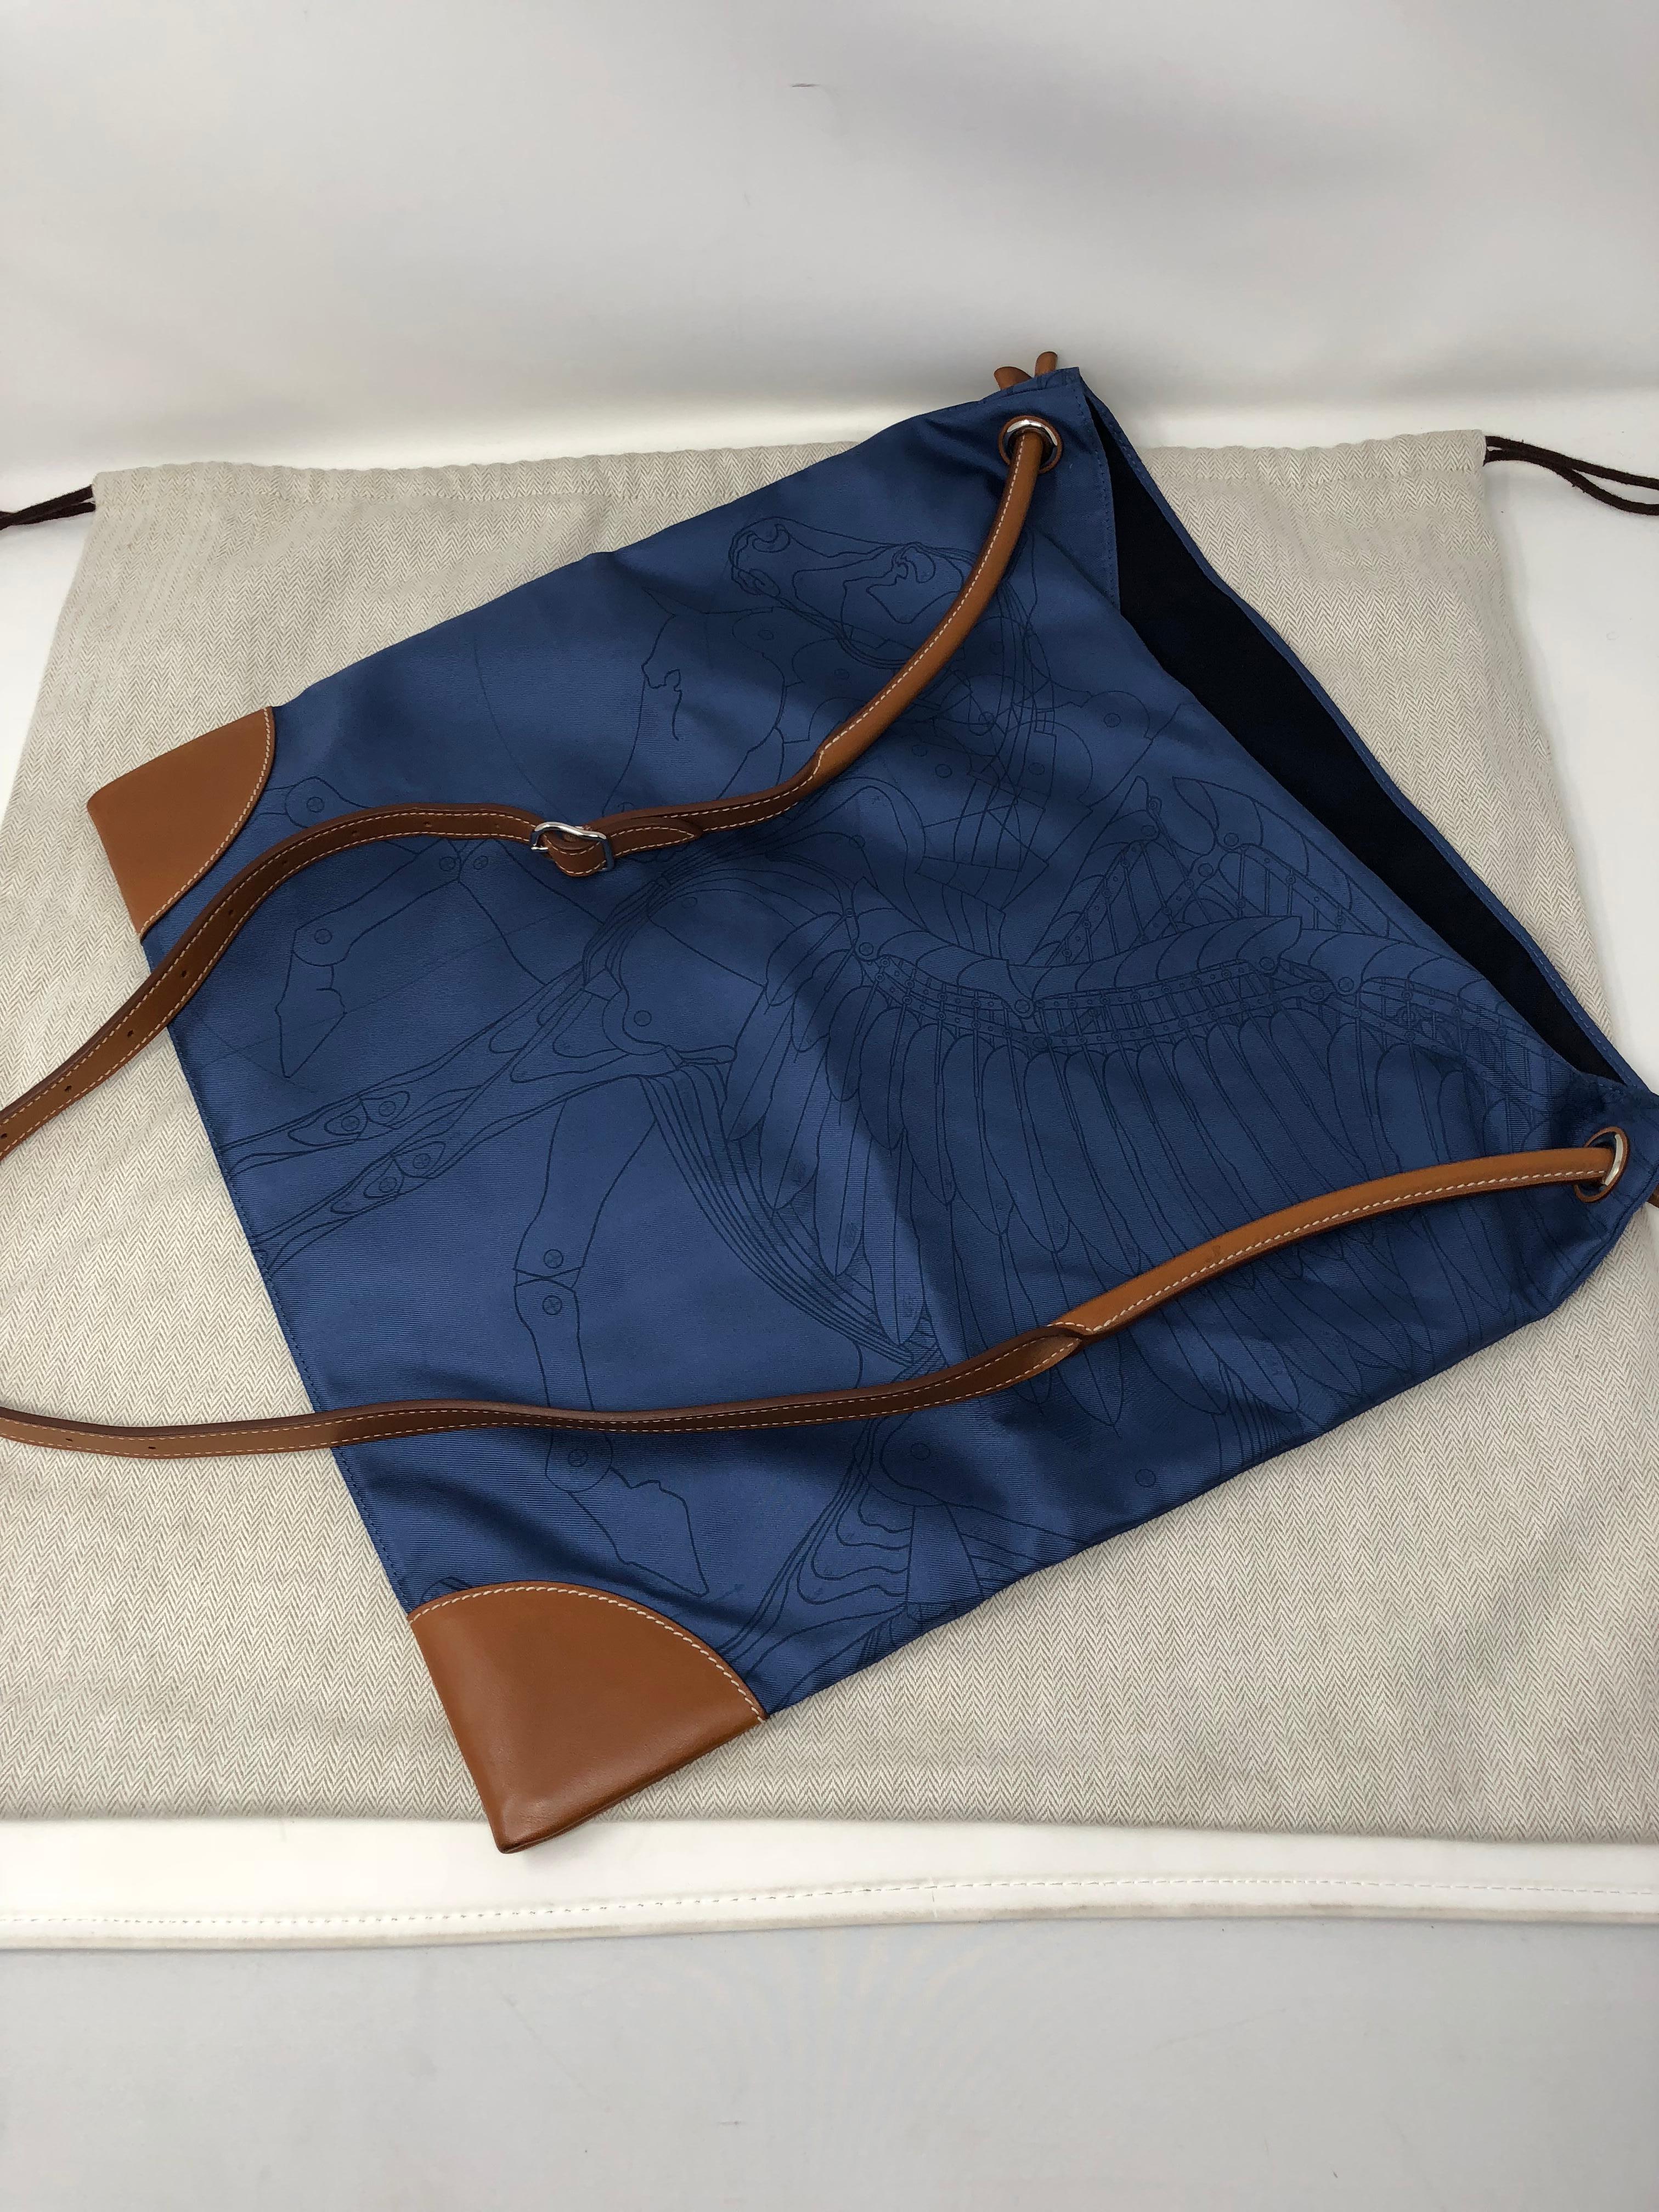 Hermes Blue Silky City Bag. Beautiful blue Silk fabric bag with horse motif design. The Silky City bag from Hermes is not only strong but made to be thin and lightweight. The leather strap is made from natural barenia calfskin with all the highest